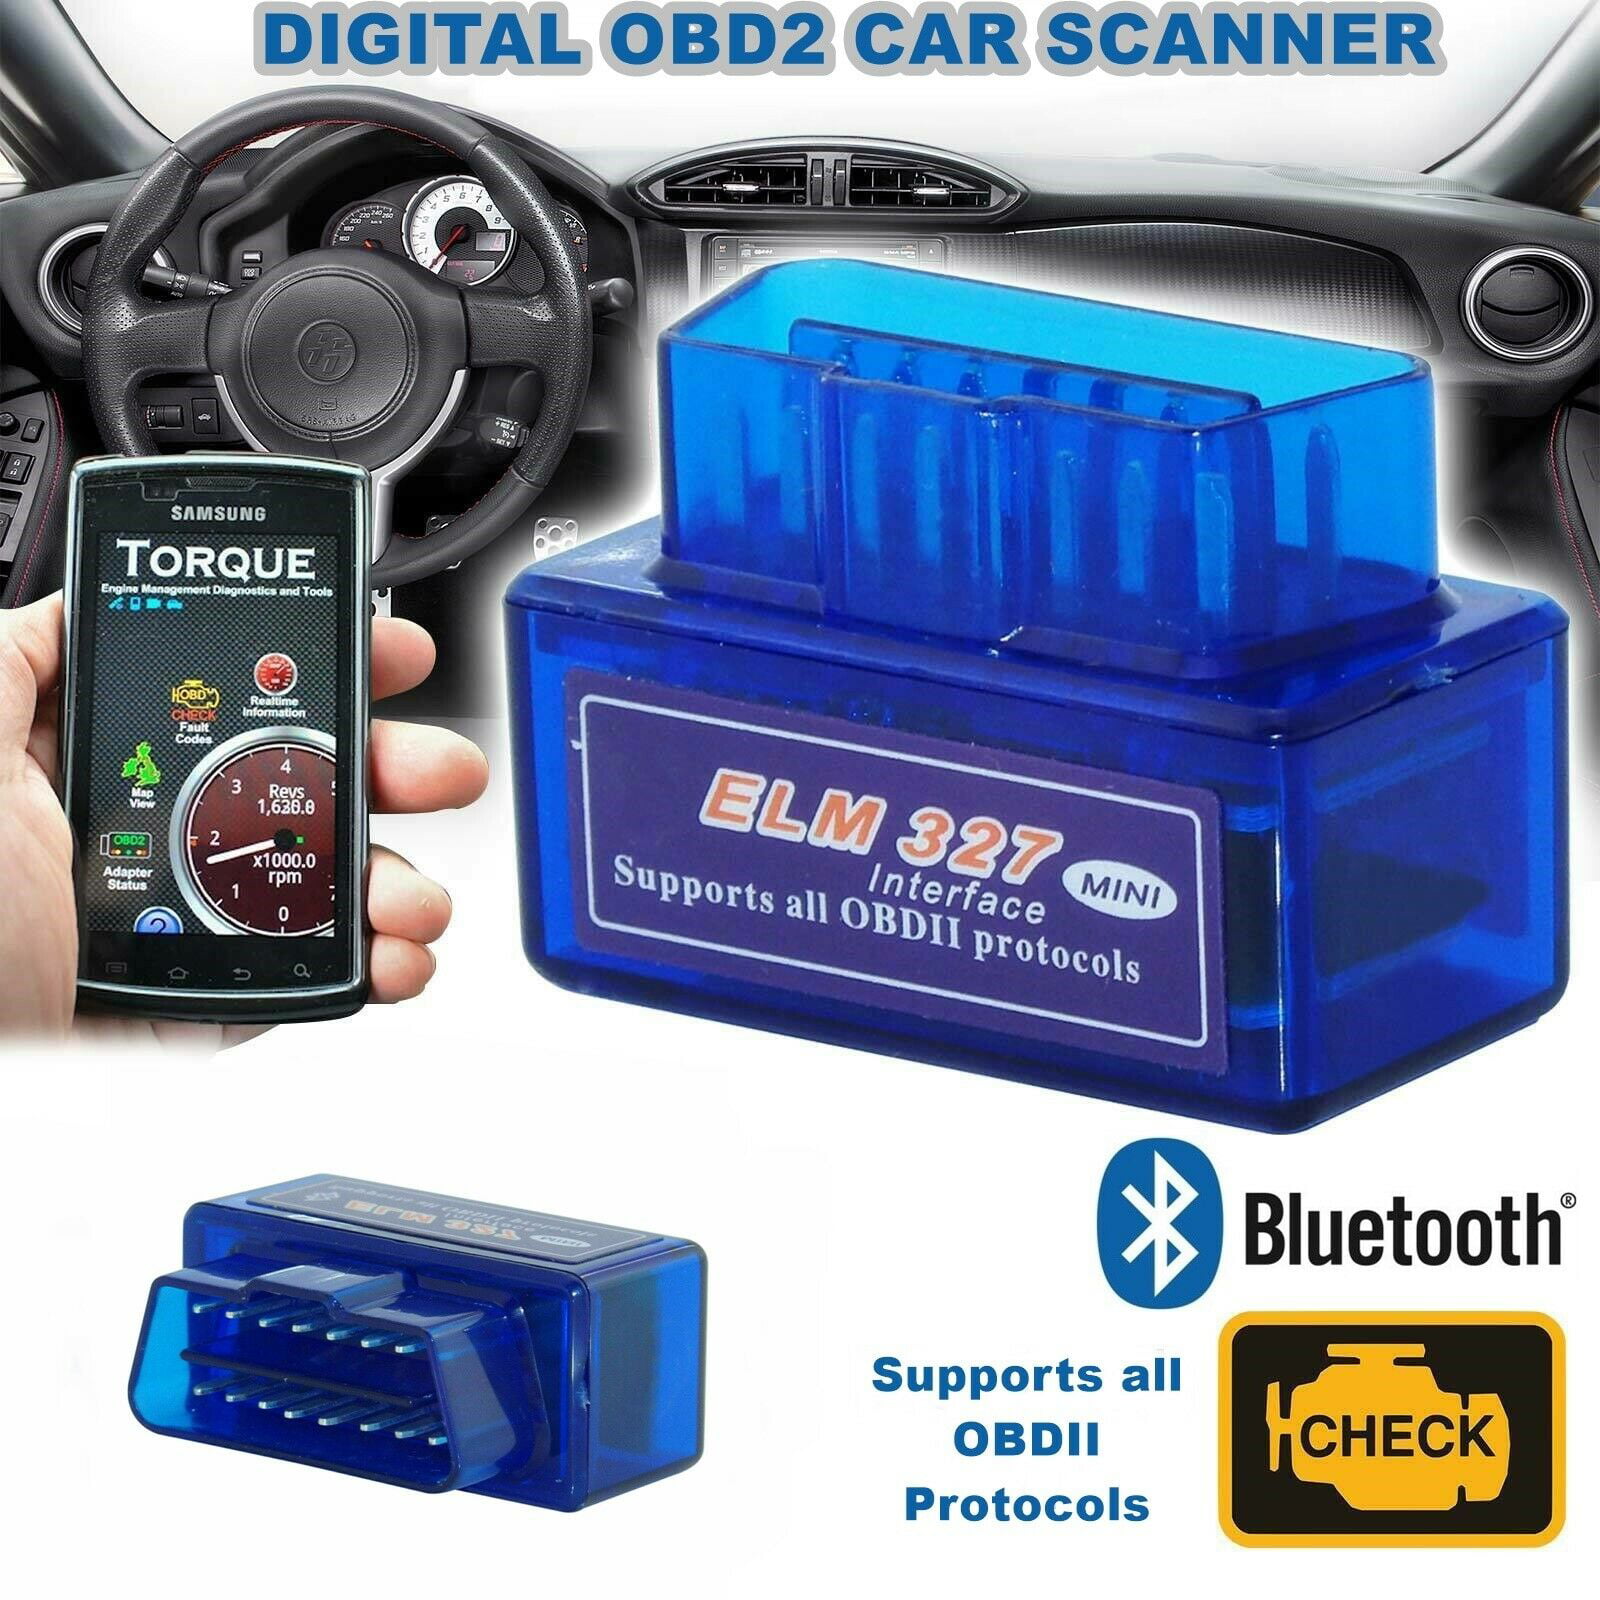 ELM327 OBD2 Bluetooth 4.0 Car Diagnostic Scanner Tool iPhone Android Fits FIAT 